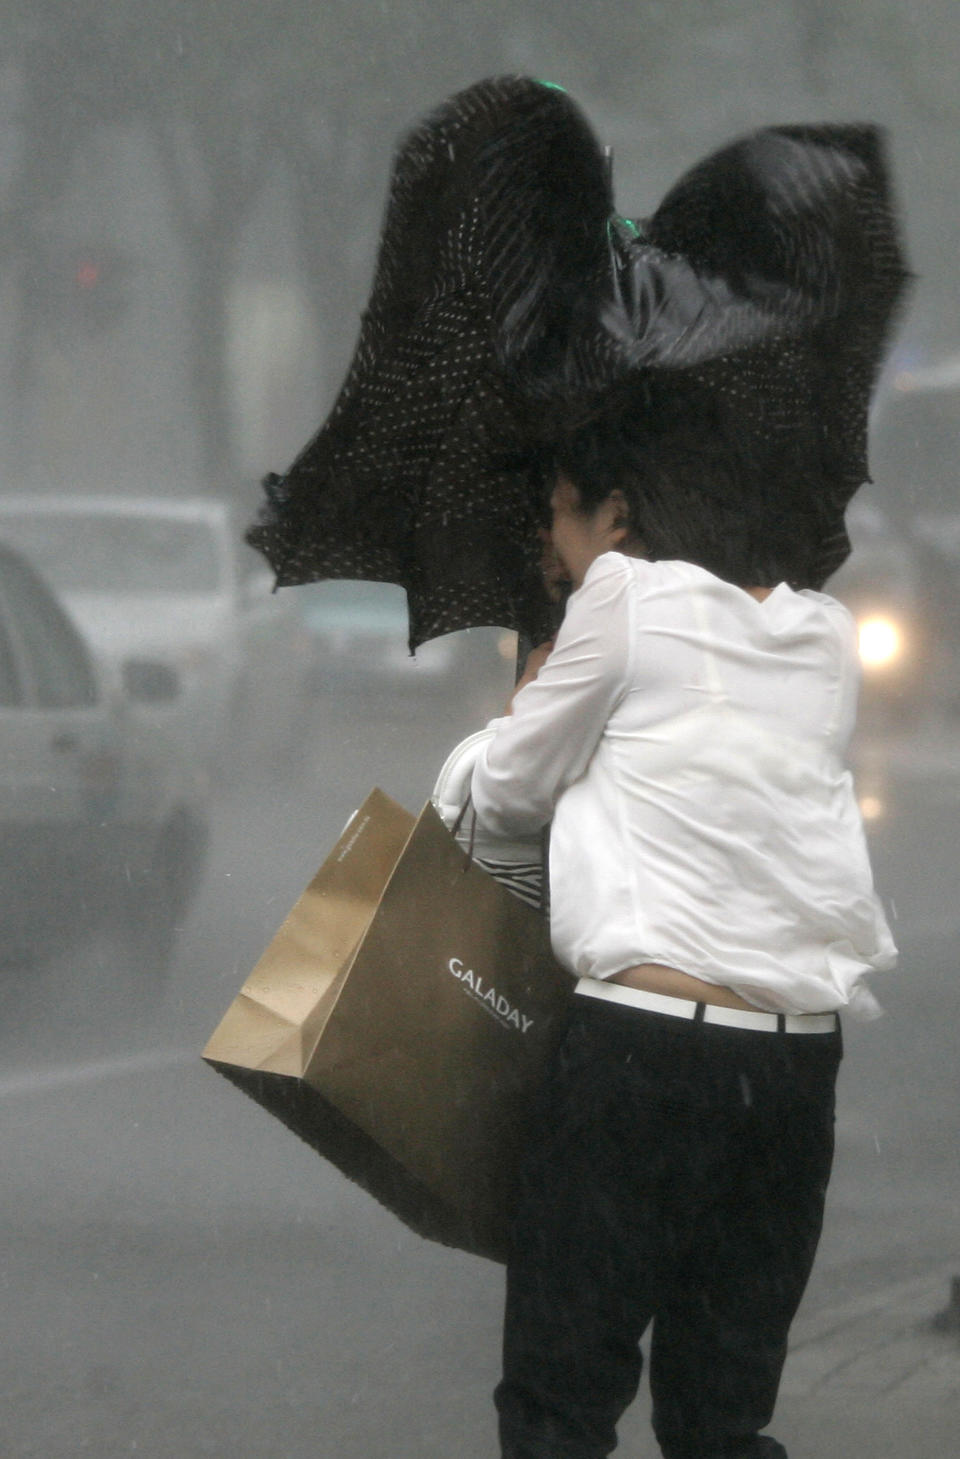 A woman walks in a rainstorm brought on by Typhoon Haikui Wednesday Aug. 8, 2012 in Shanghai, China. The typhoon slammed into eastern China's Zhejiang province early Wednesday, packing winds up to 150 kilometers (90 miles) per hour and triggering flooding. (AP Photo)